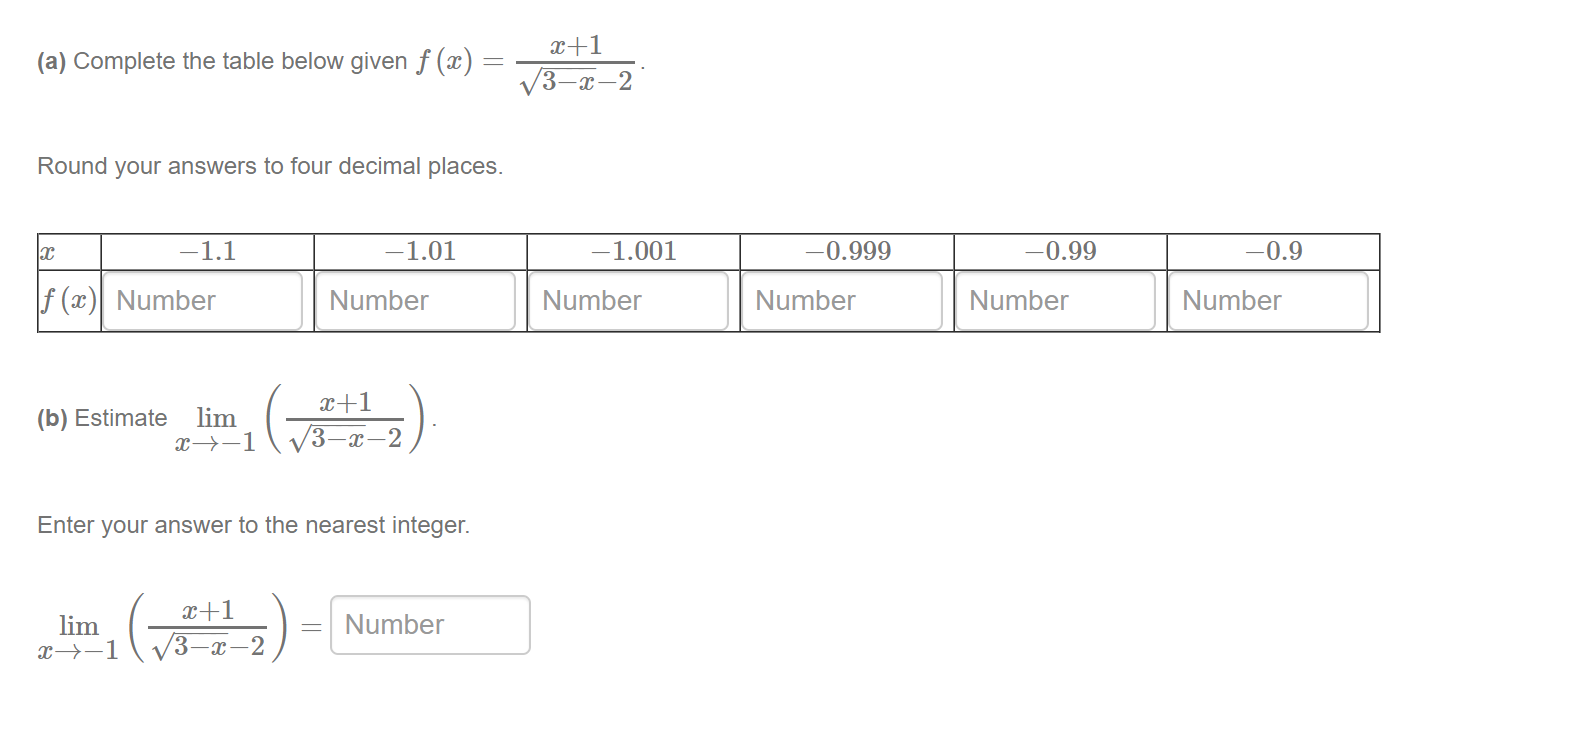 x+1
(a) Complete the table below given f (x) =
V3-x-2
Round your answers to four decimal places.
-1.1
-1.01
-1.001
-0.999
-0.99
-0.9
f (x)| Number
Number
Number
Number
Number
Number
lim
x→-1
x+1
V3-x-2
(b) Estimate
Enter your answer to the nearest integer.
x+1
Number
lim
x→-1
/3–x–2
